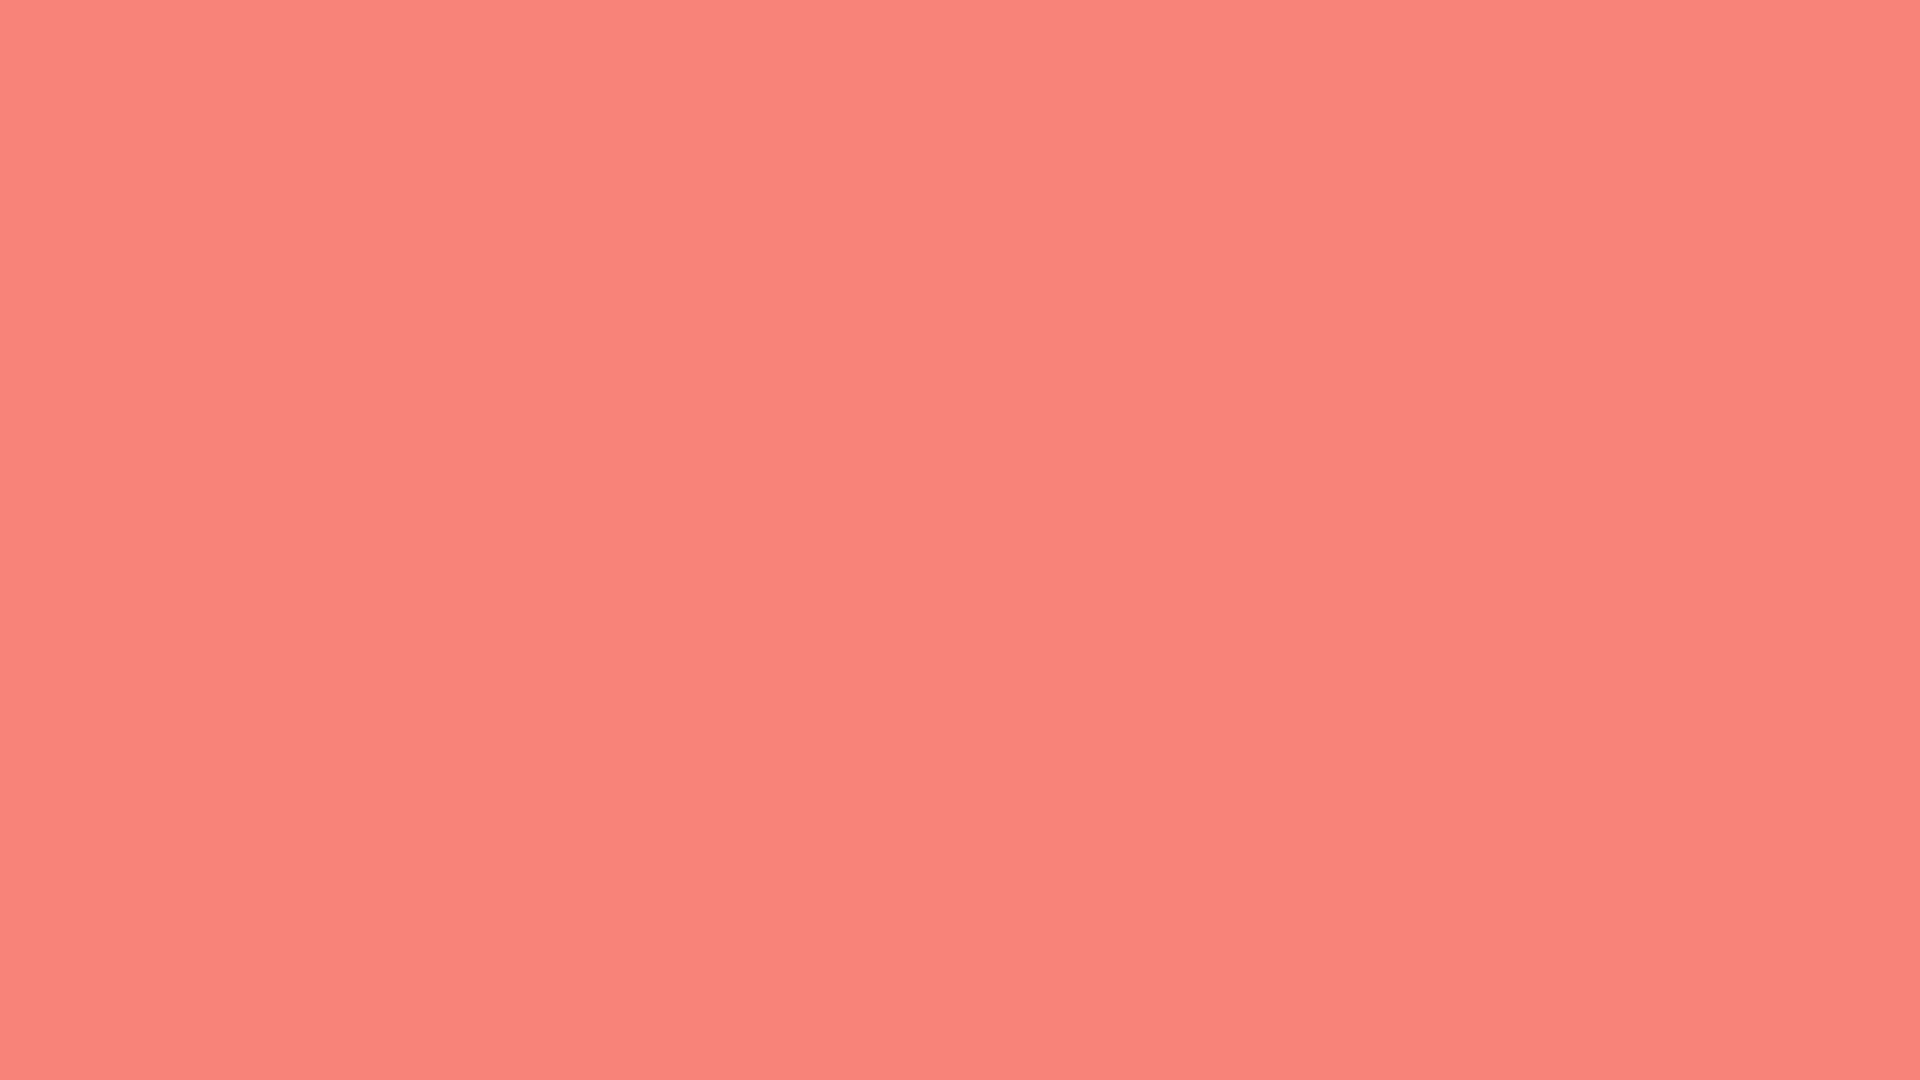 A pink background with no text - Coral